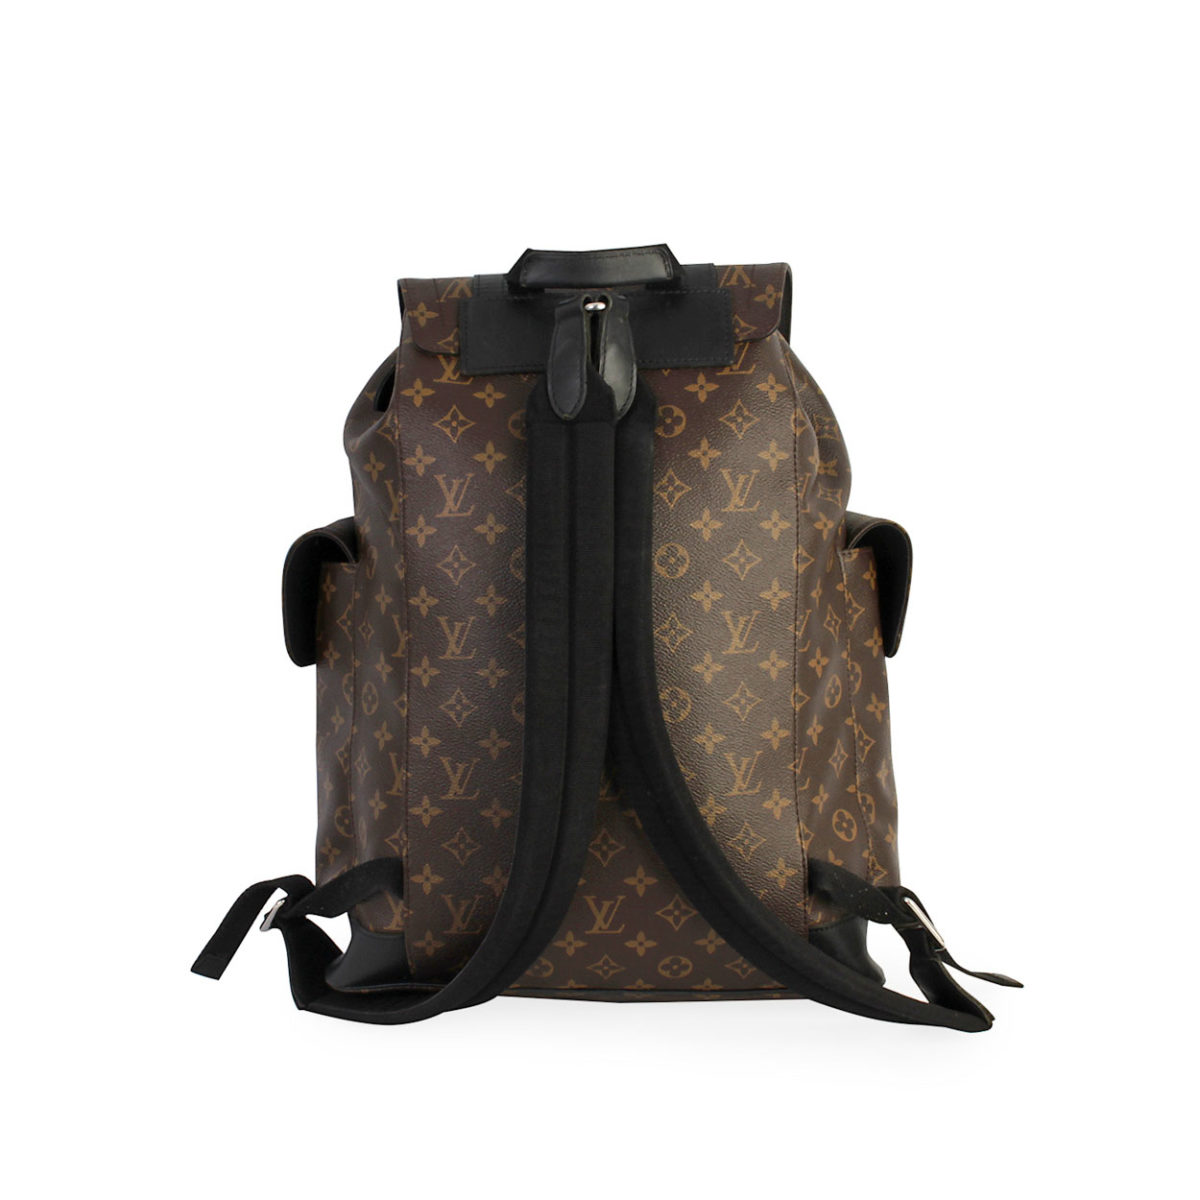 Louis Vuitton Monogram Canvas Macassar Christopher PM Backpack in